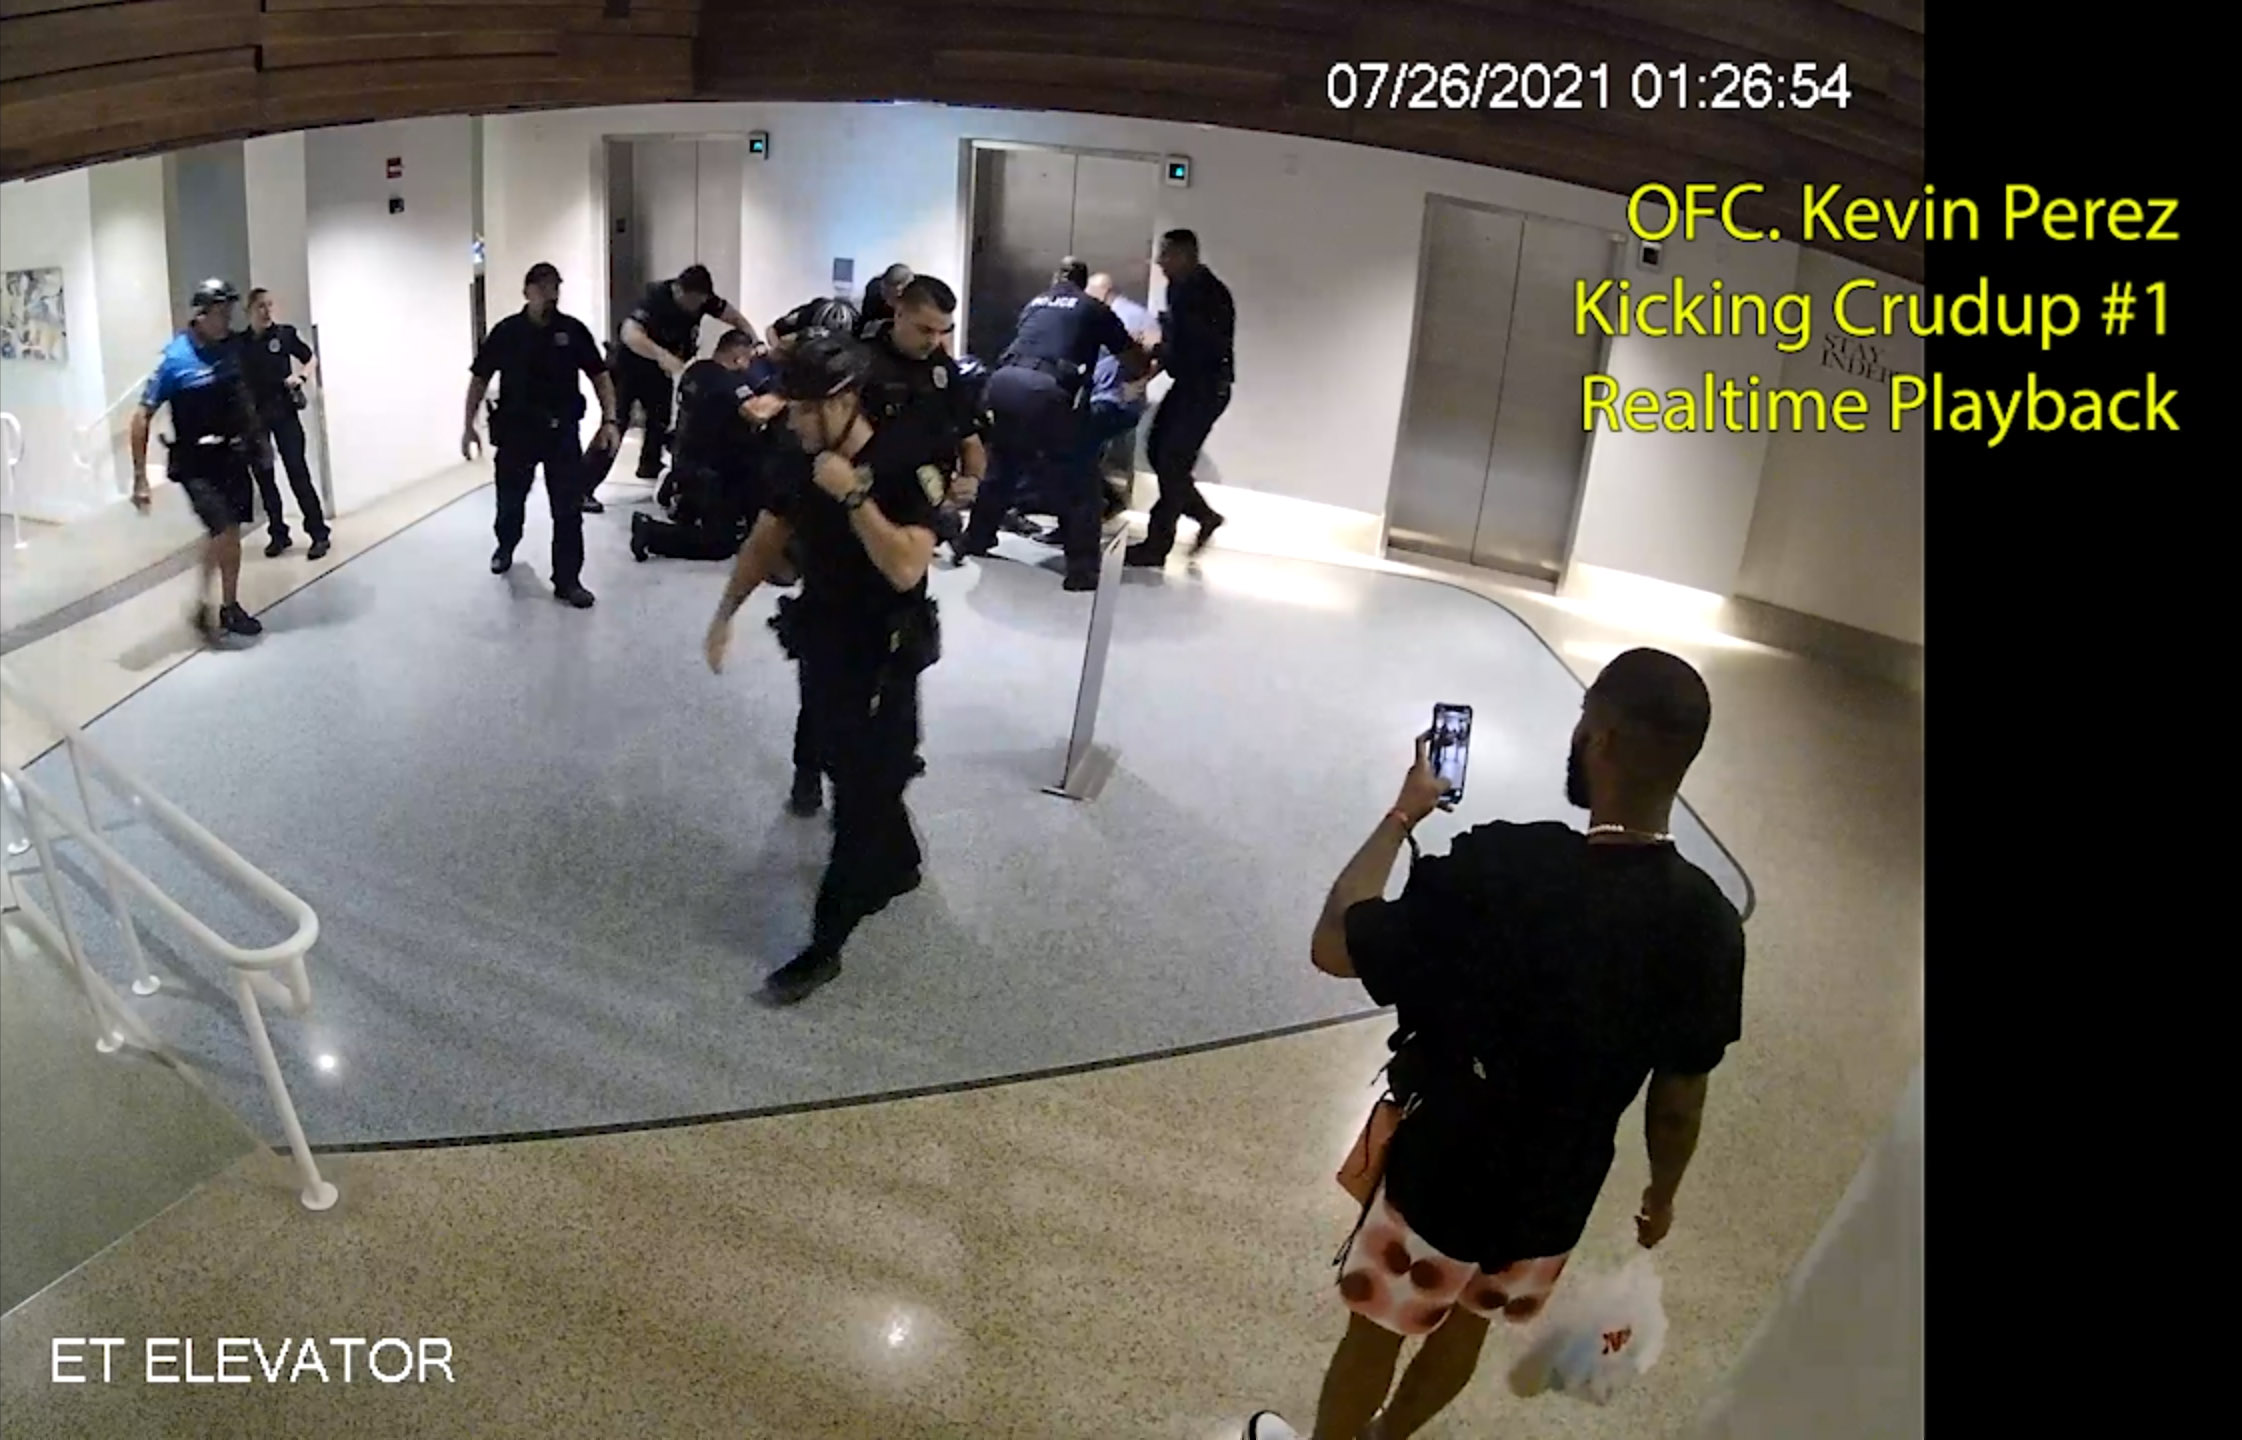 PHOTO: Officer Kevin Perez is seen as he motions to kick Dalonta Crudup while Khalid Vaughn stands on the far right recording video with his phone, in an image taken from hotel surveillance video released by the Miami-Dade State Attorney’s Office.